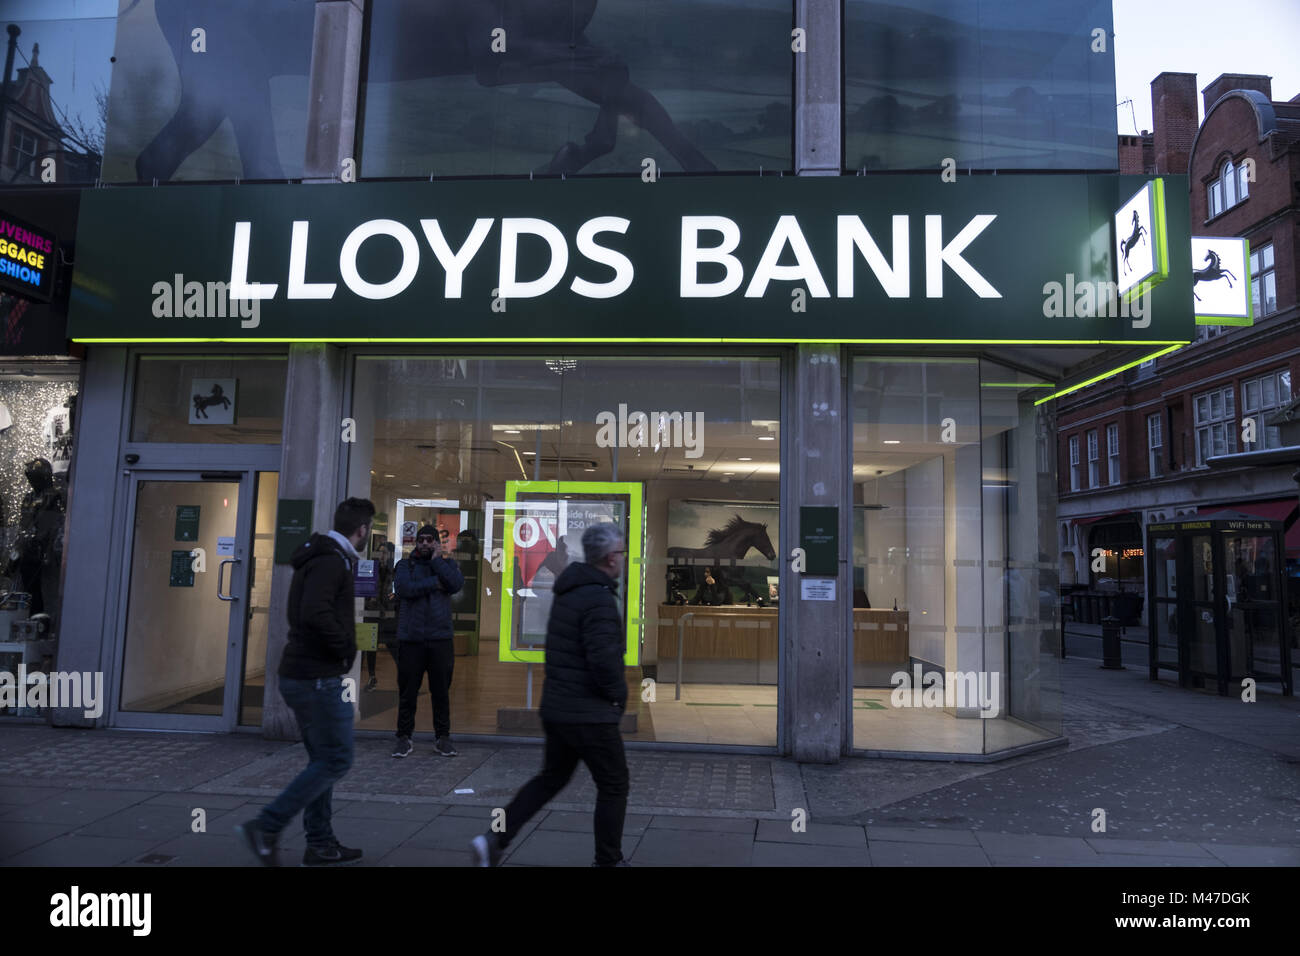 London, UK. 30th Jan, 2018. Lloyds Bank store seen in London famous Oxford street. Central London is one of the most attractive tourist attraction for individuals whose willing to shop and enjoy the variety of famous and worldwide brands. Credit: Rahman Hassani/SOPA/ZUMA Wire/Alamy Live News Stock Photo